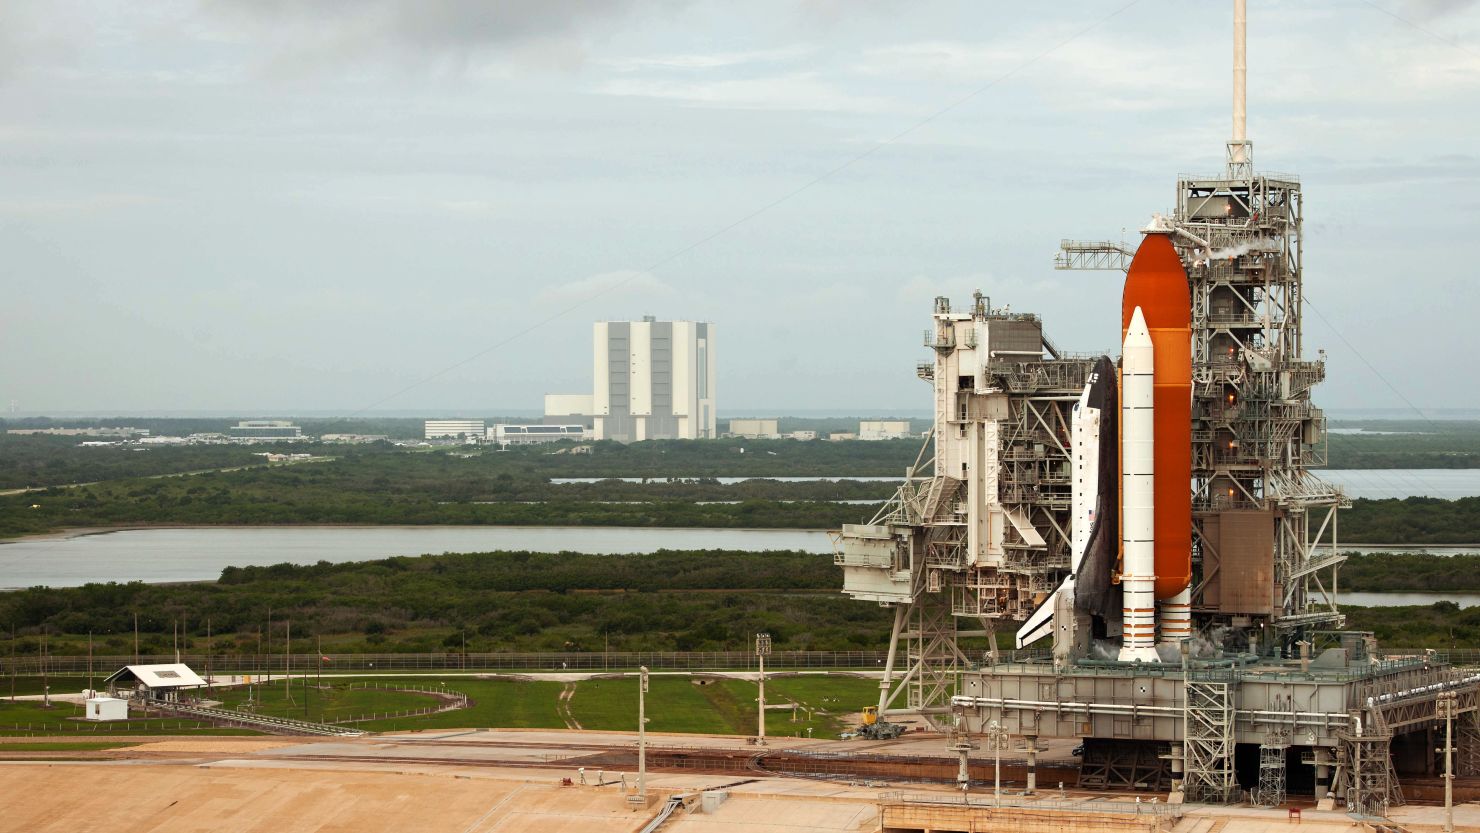 Pad 39A is one of the locations at the Kennedy Space Center from which space shuttle and Apollo missions were launched.